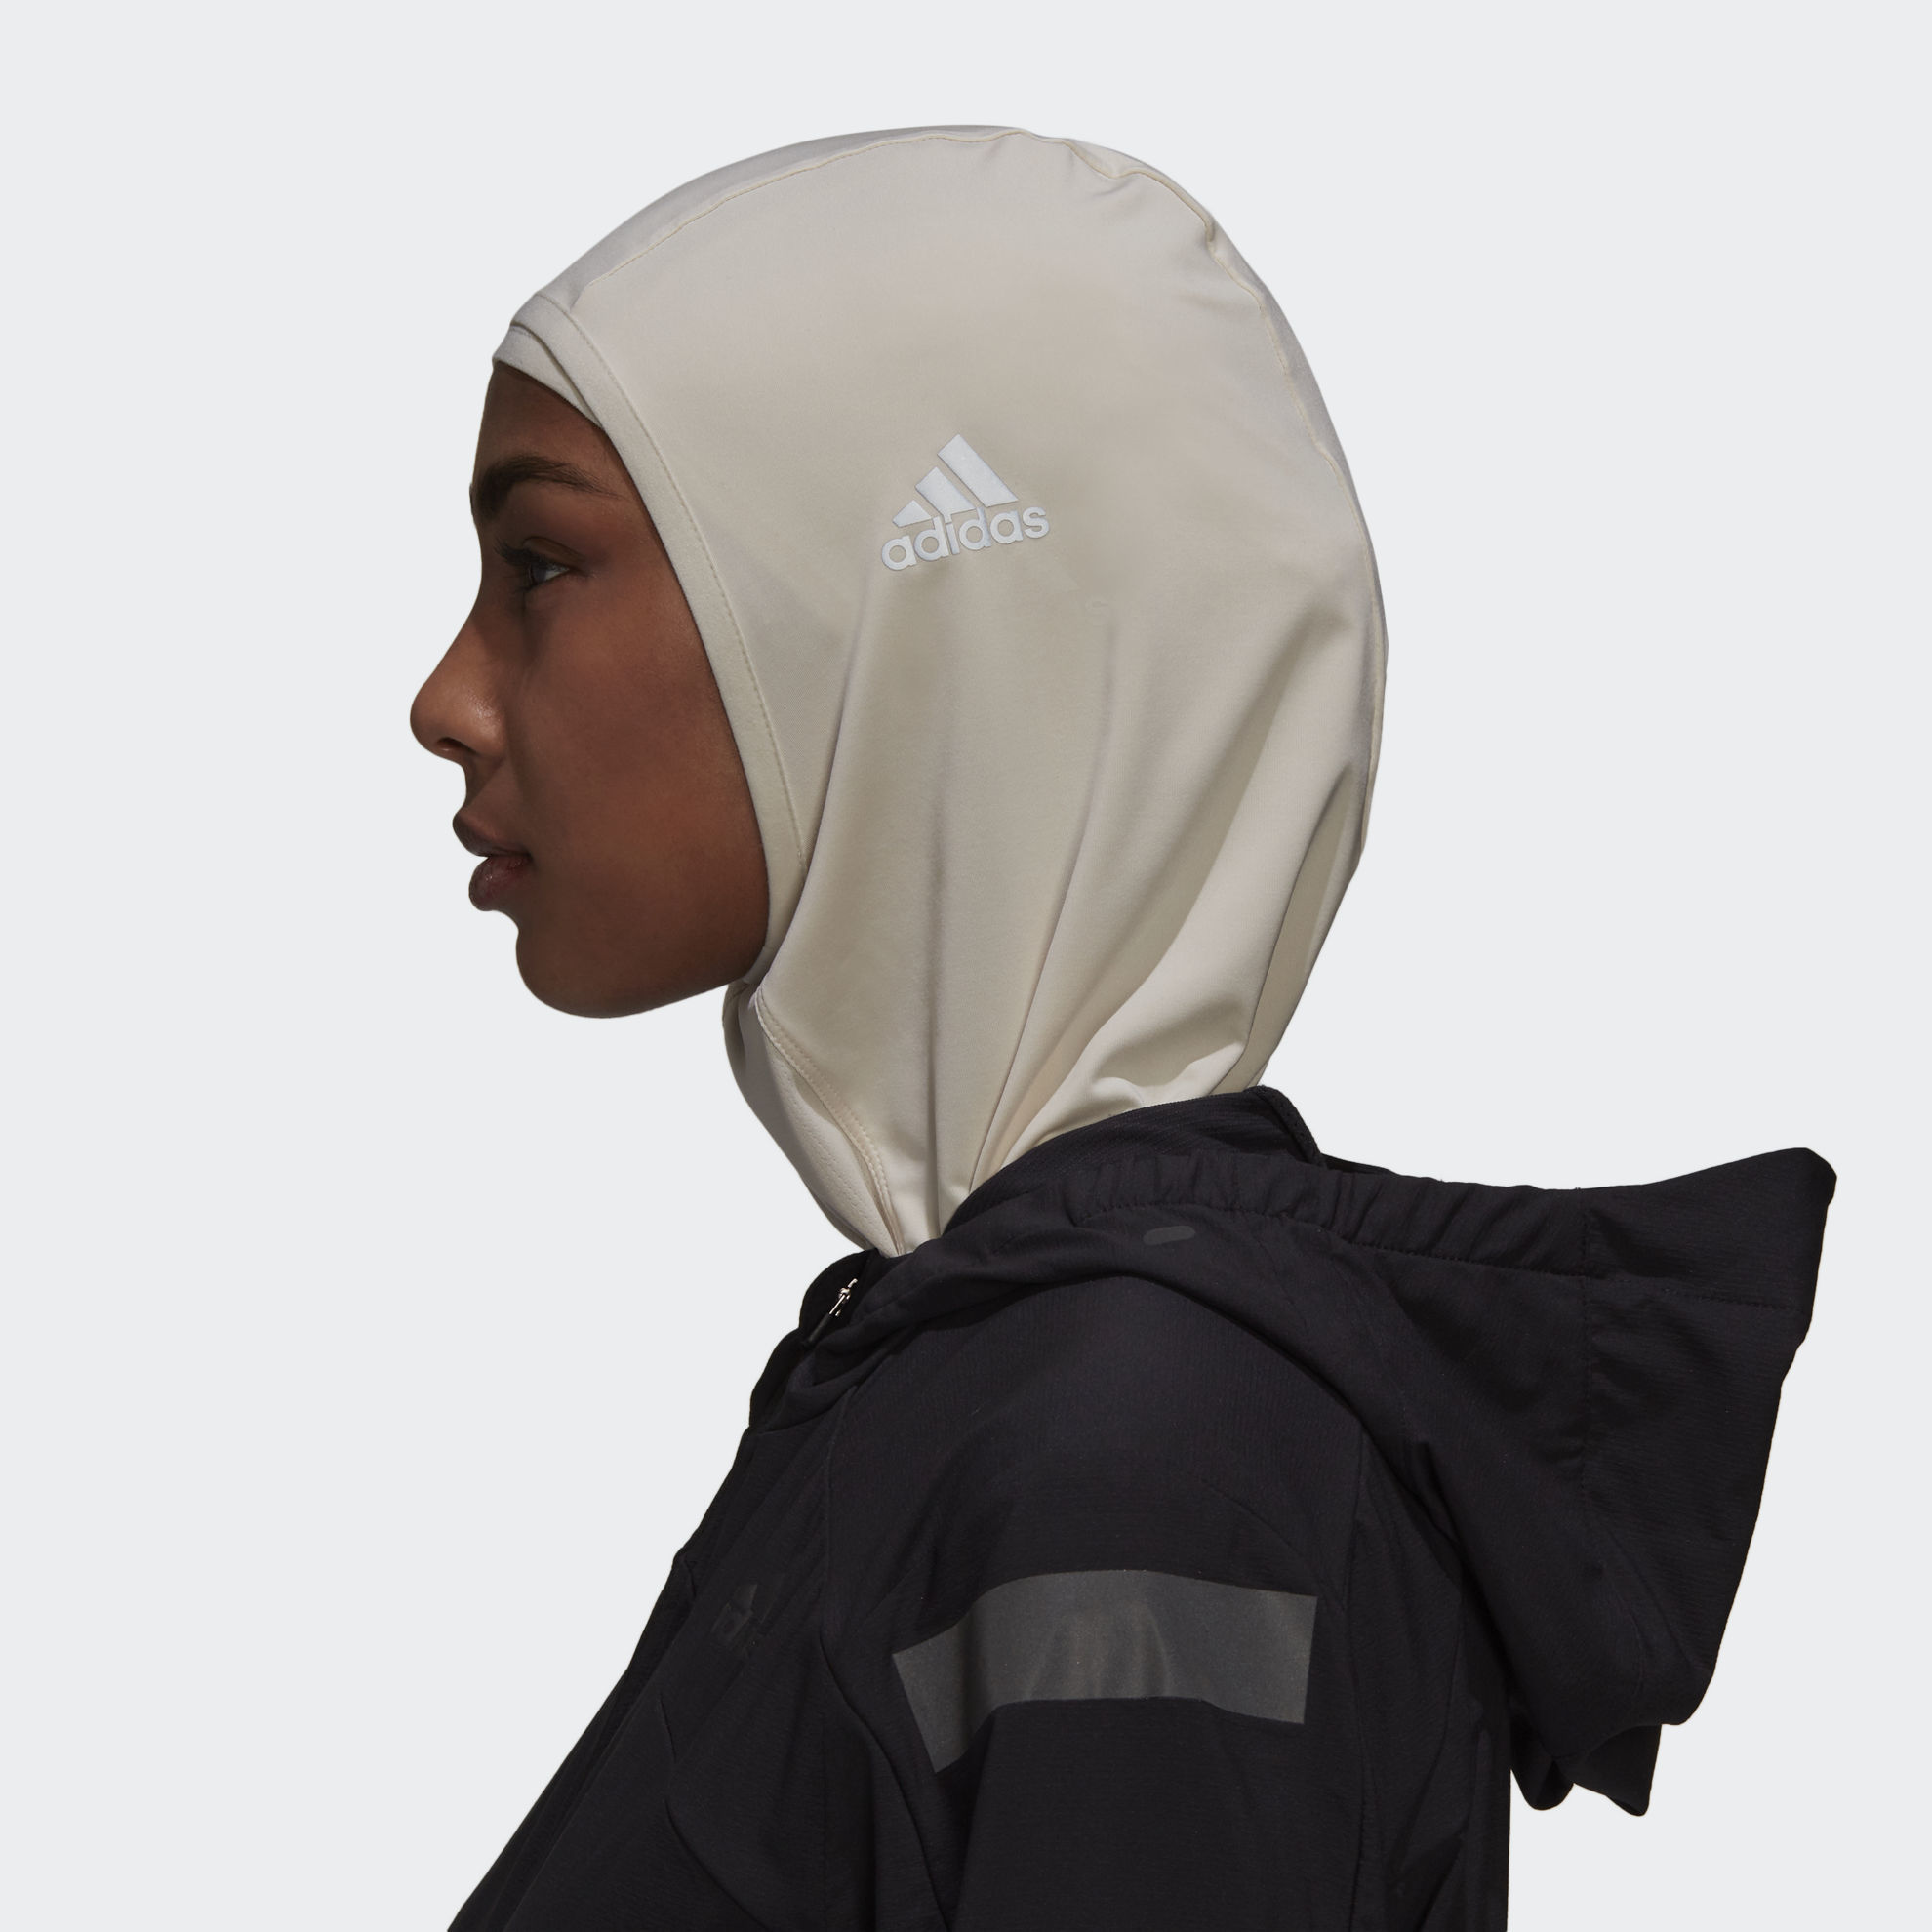 6 Day Adidas workout hijab for Gym